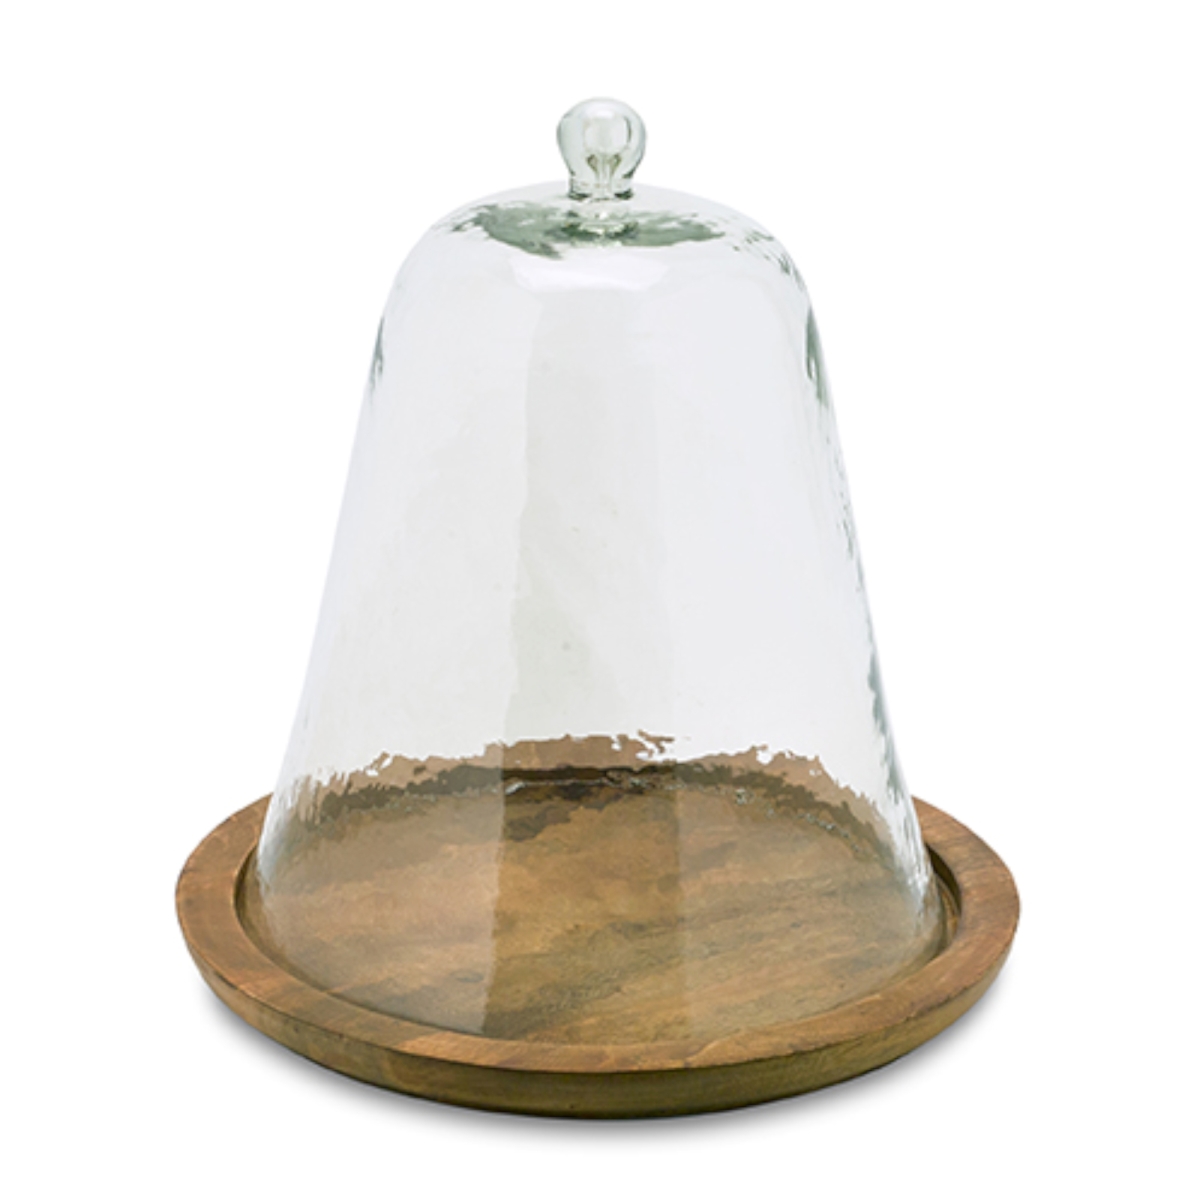 72093ds 18.5 X 17 In. Glass & Wood Cloche On Plate Home Decor Tabletop, Brown & Glass